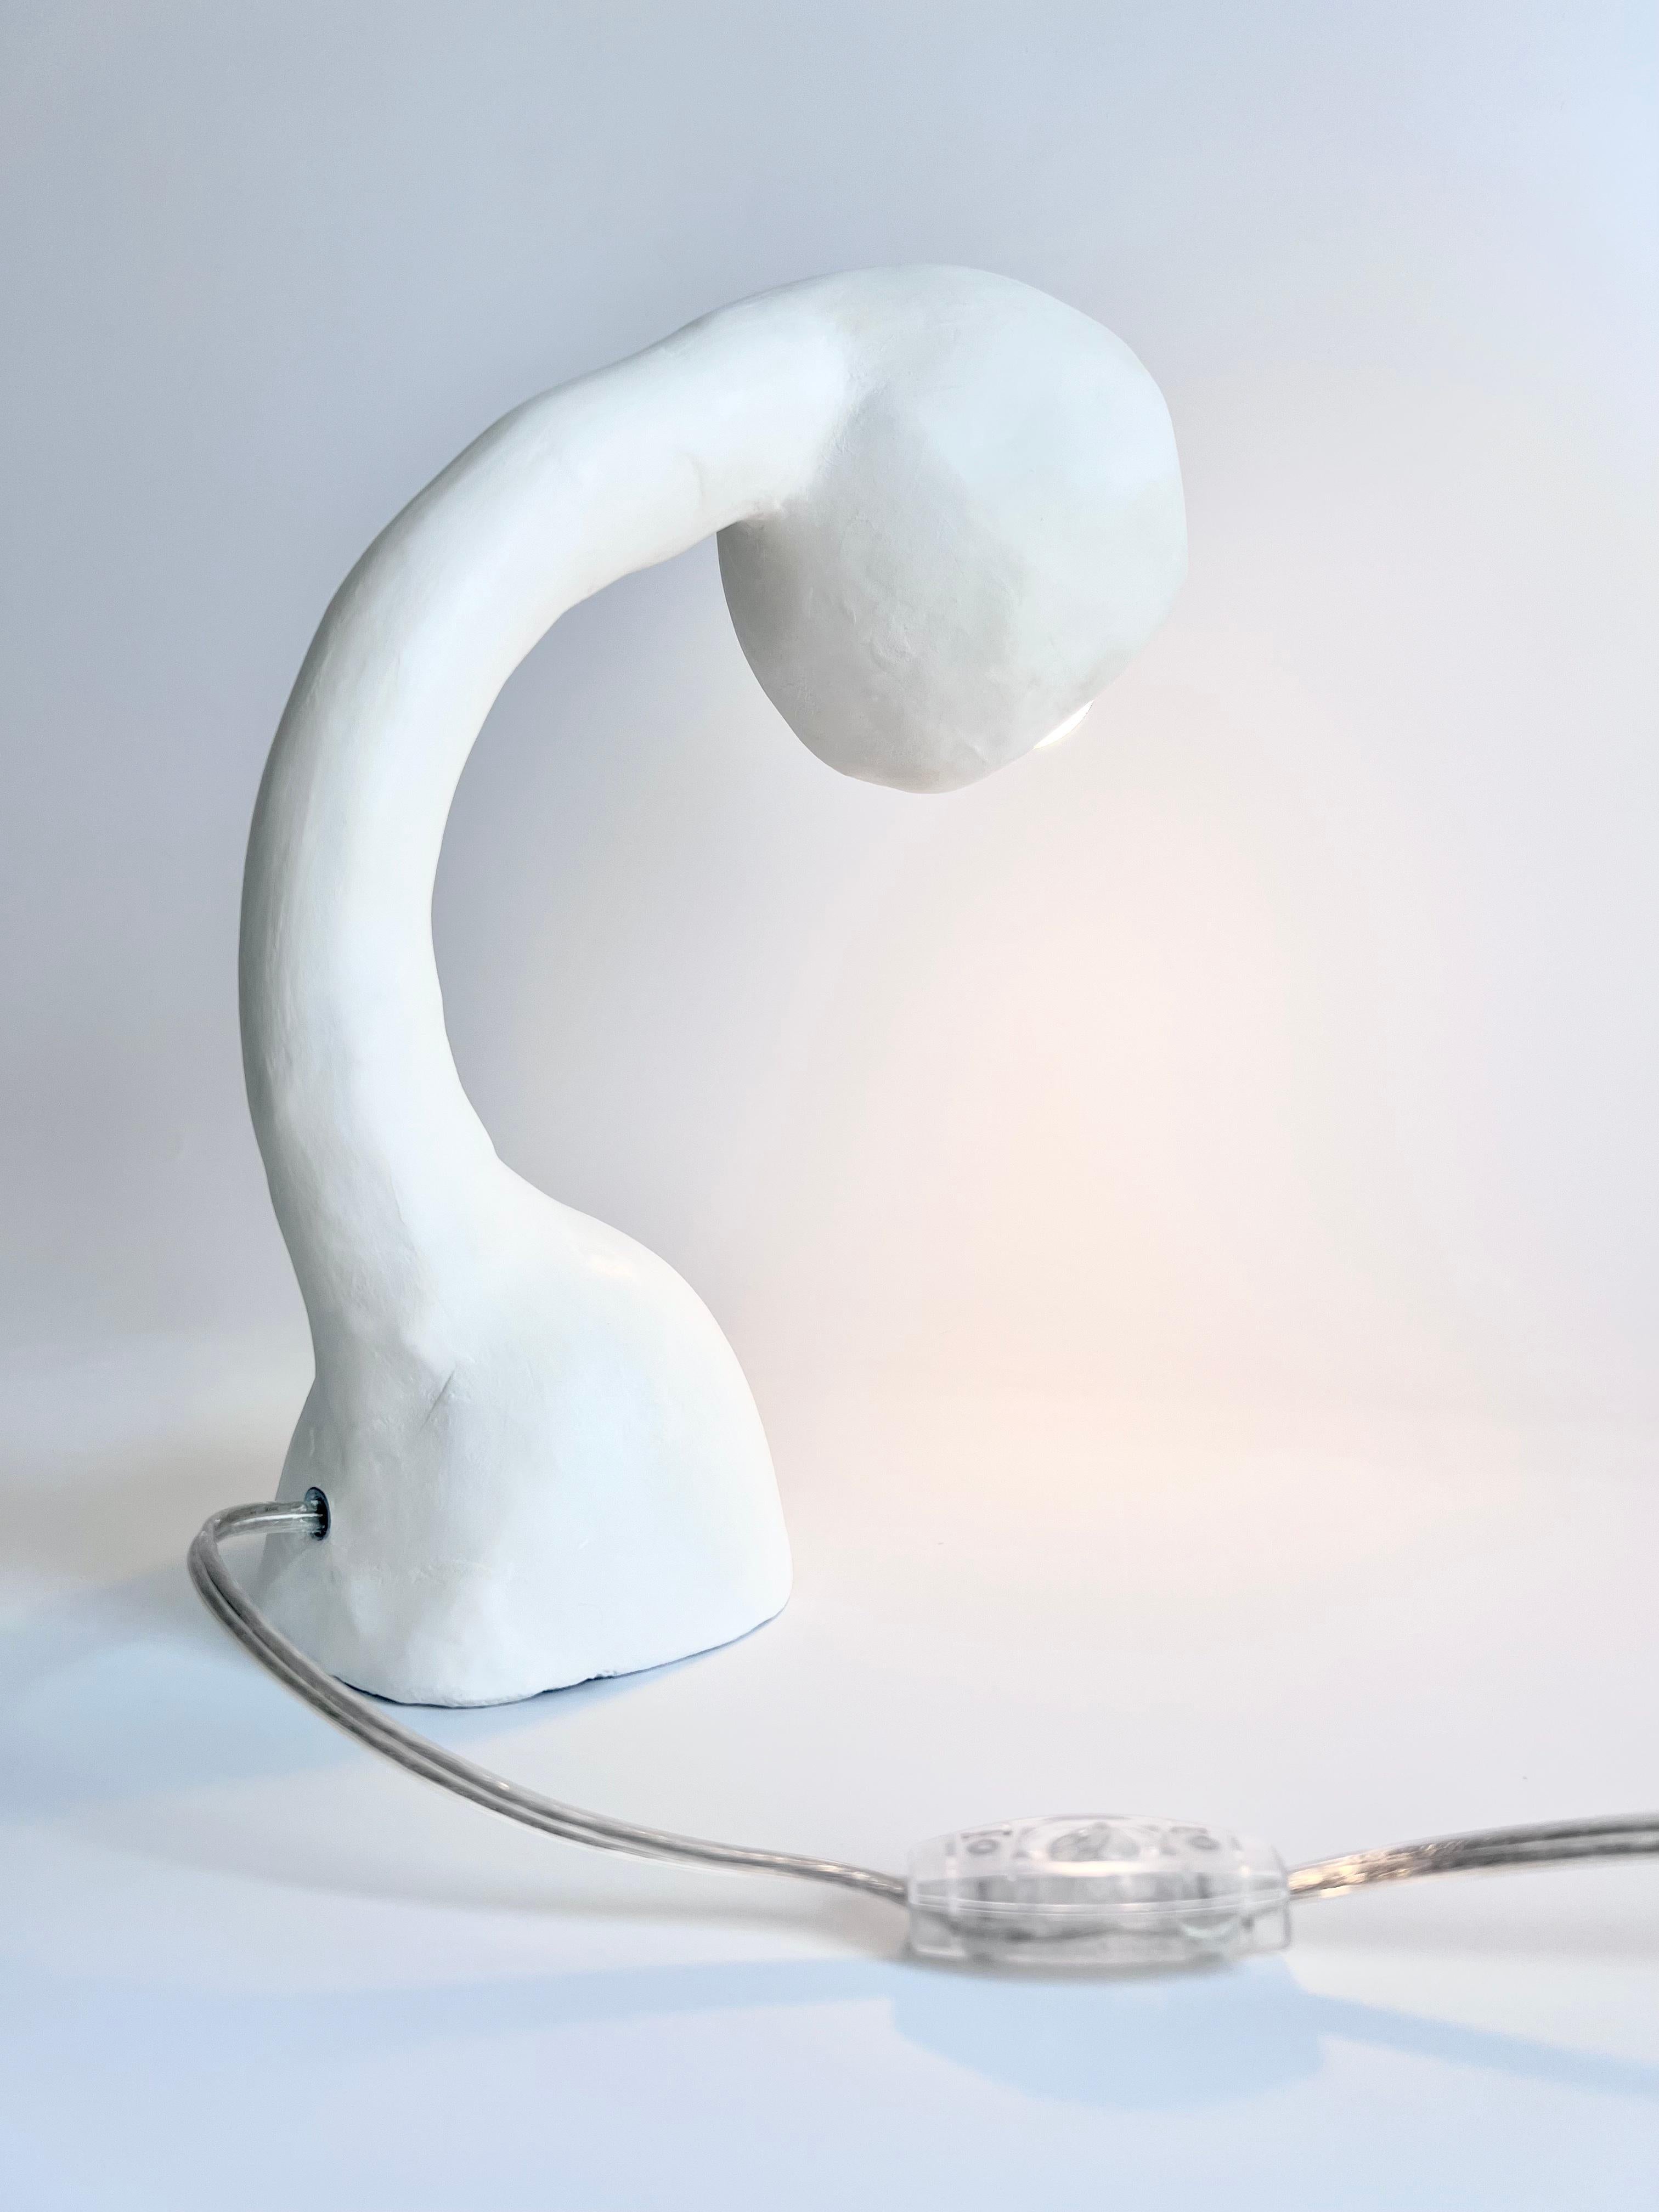 Organic Modern Biomorphic Line by Studio Chora, Table Lamp, White Lime Plaster, in Stock